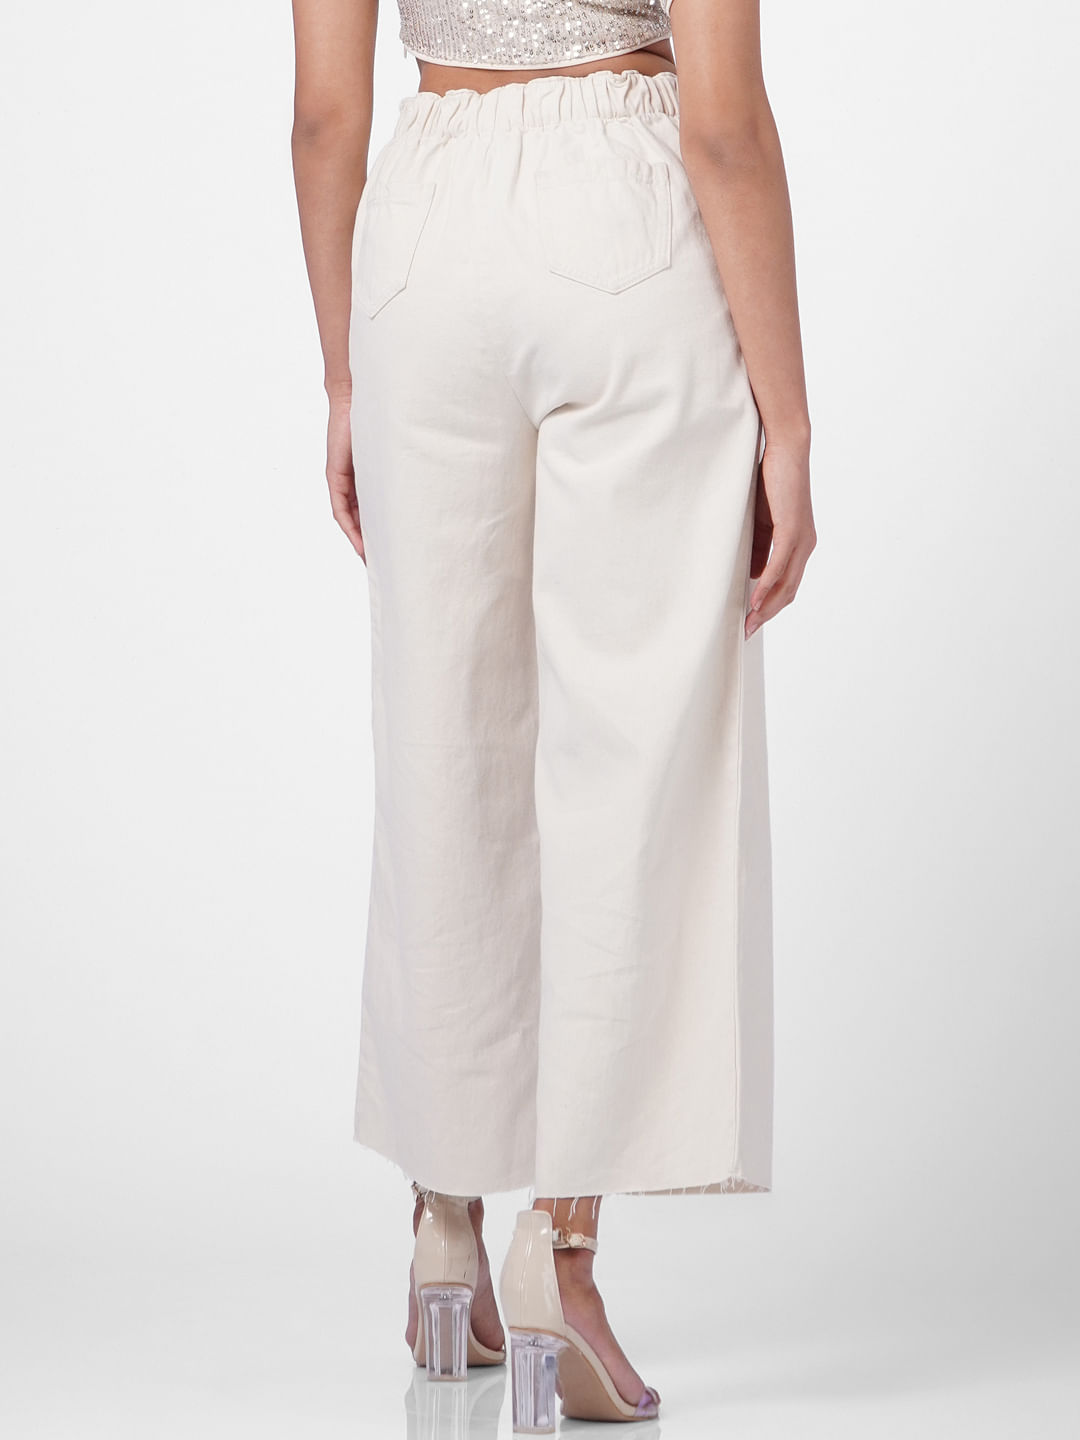 High Waist Palazzo Denim Wide Pants Women For Women Perfect For Dressy  Occasions In Fall And Winter From Argentinay, $32.42 | DHgate.Com